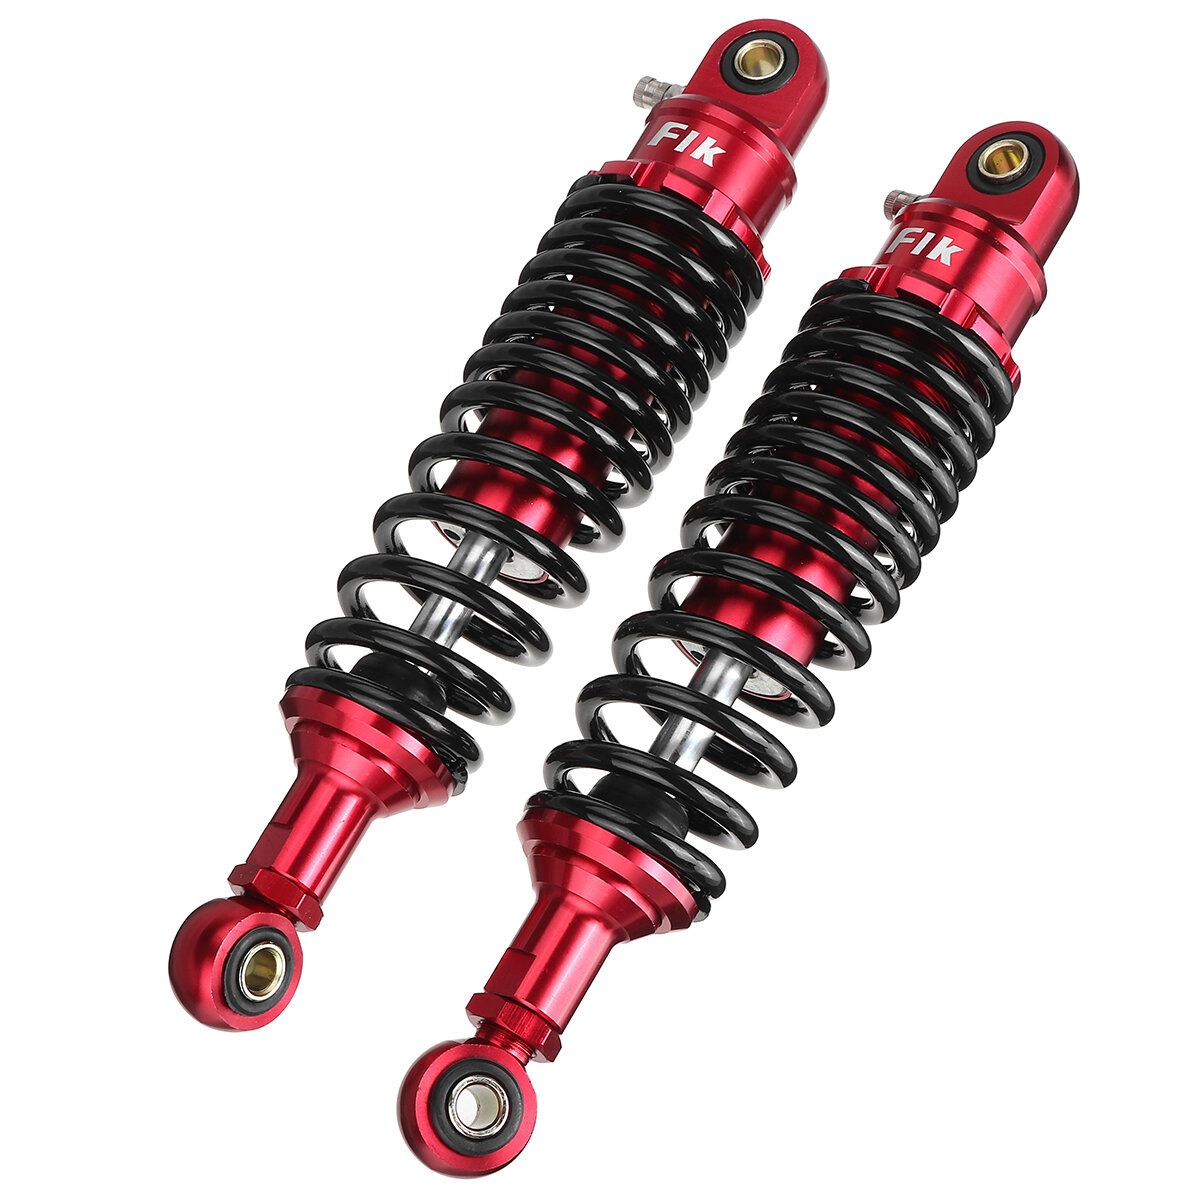 Image of 290mm Motorcycle Air Shock Absorber Rear Suspension For Yamaha/Honda Motor Scooter Dio Nmax ATV Quad Dirt Bike Universal